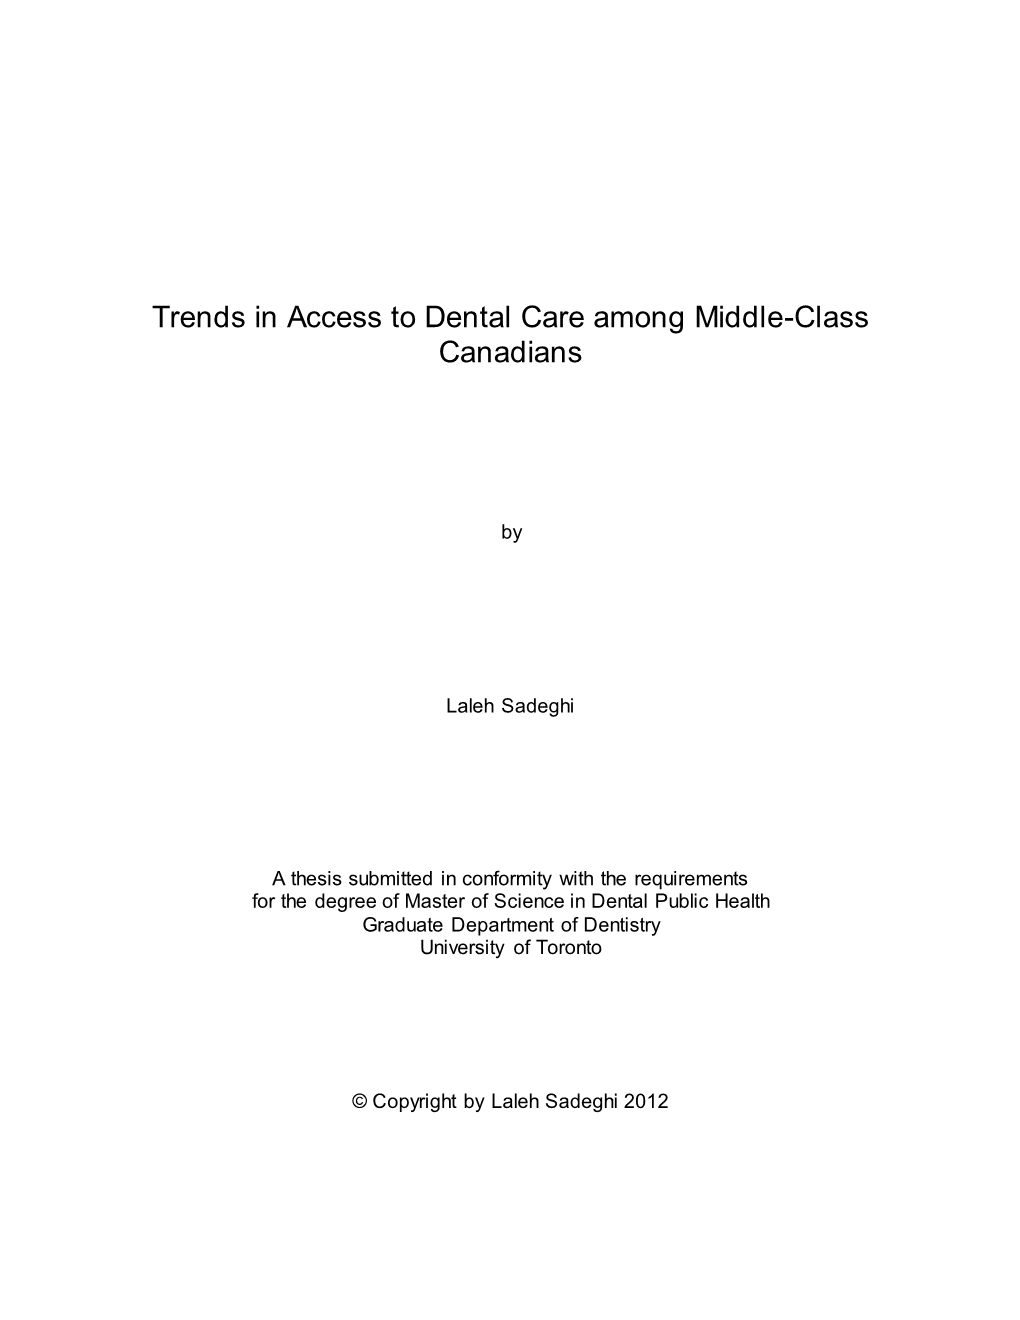 Trends in Access to Dental Care Among Middle-Class Canadians